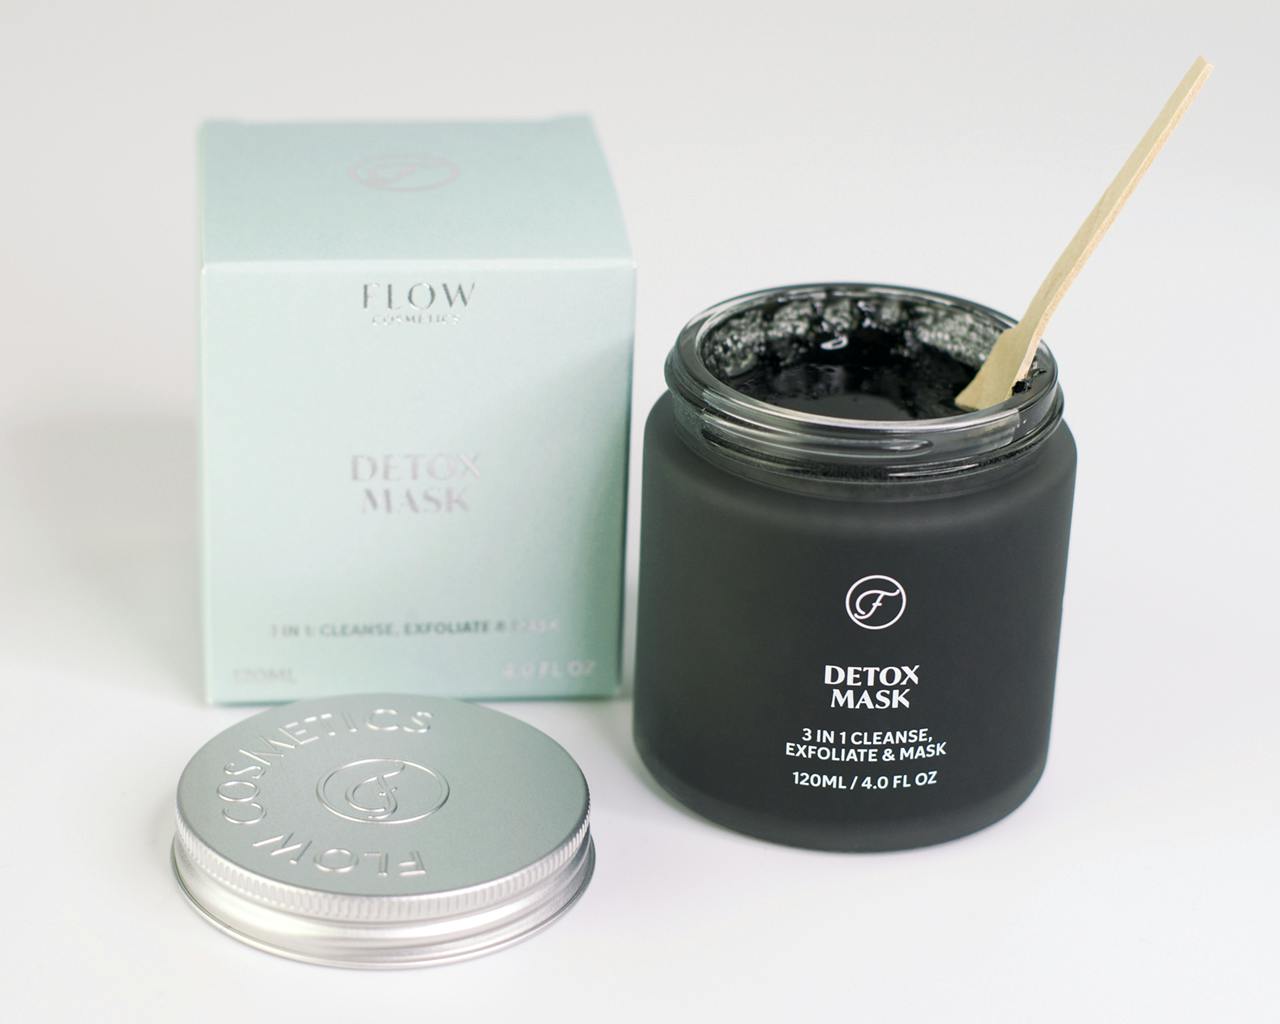 Detox mask, exfoliating, activated charcoal, face mask, natural beauty, organic beauty products, Nordic beauty